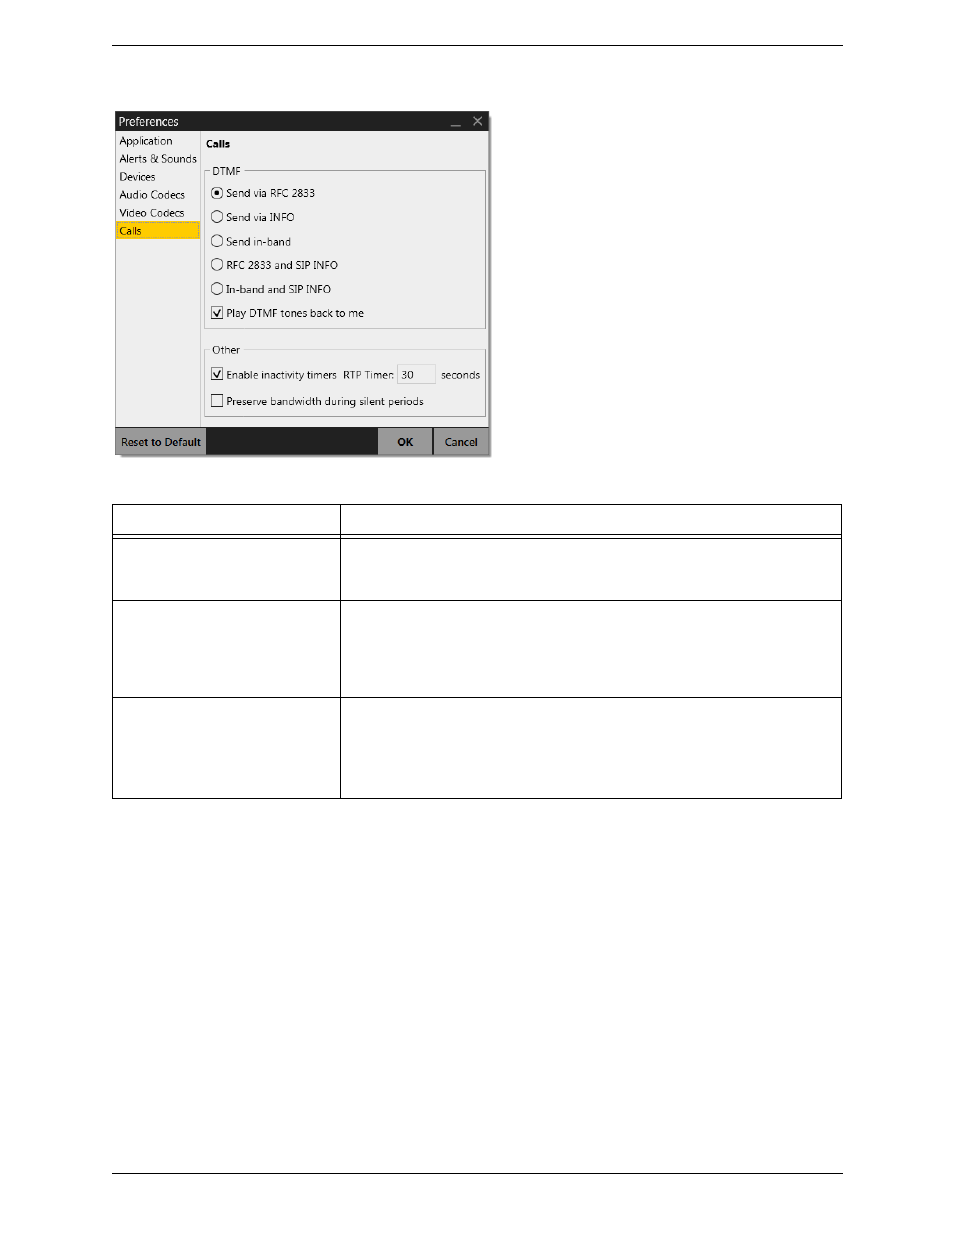 Preferences – calls | CounterPath X-Lite 4.6 for Windows User Guide User Manual | Page 54 / 66